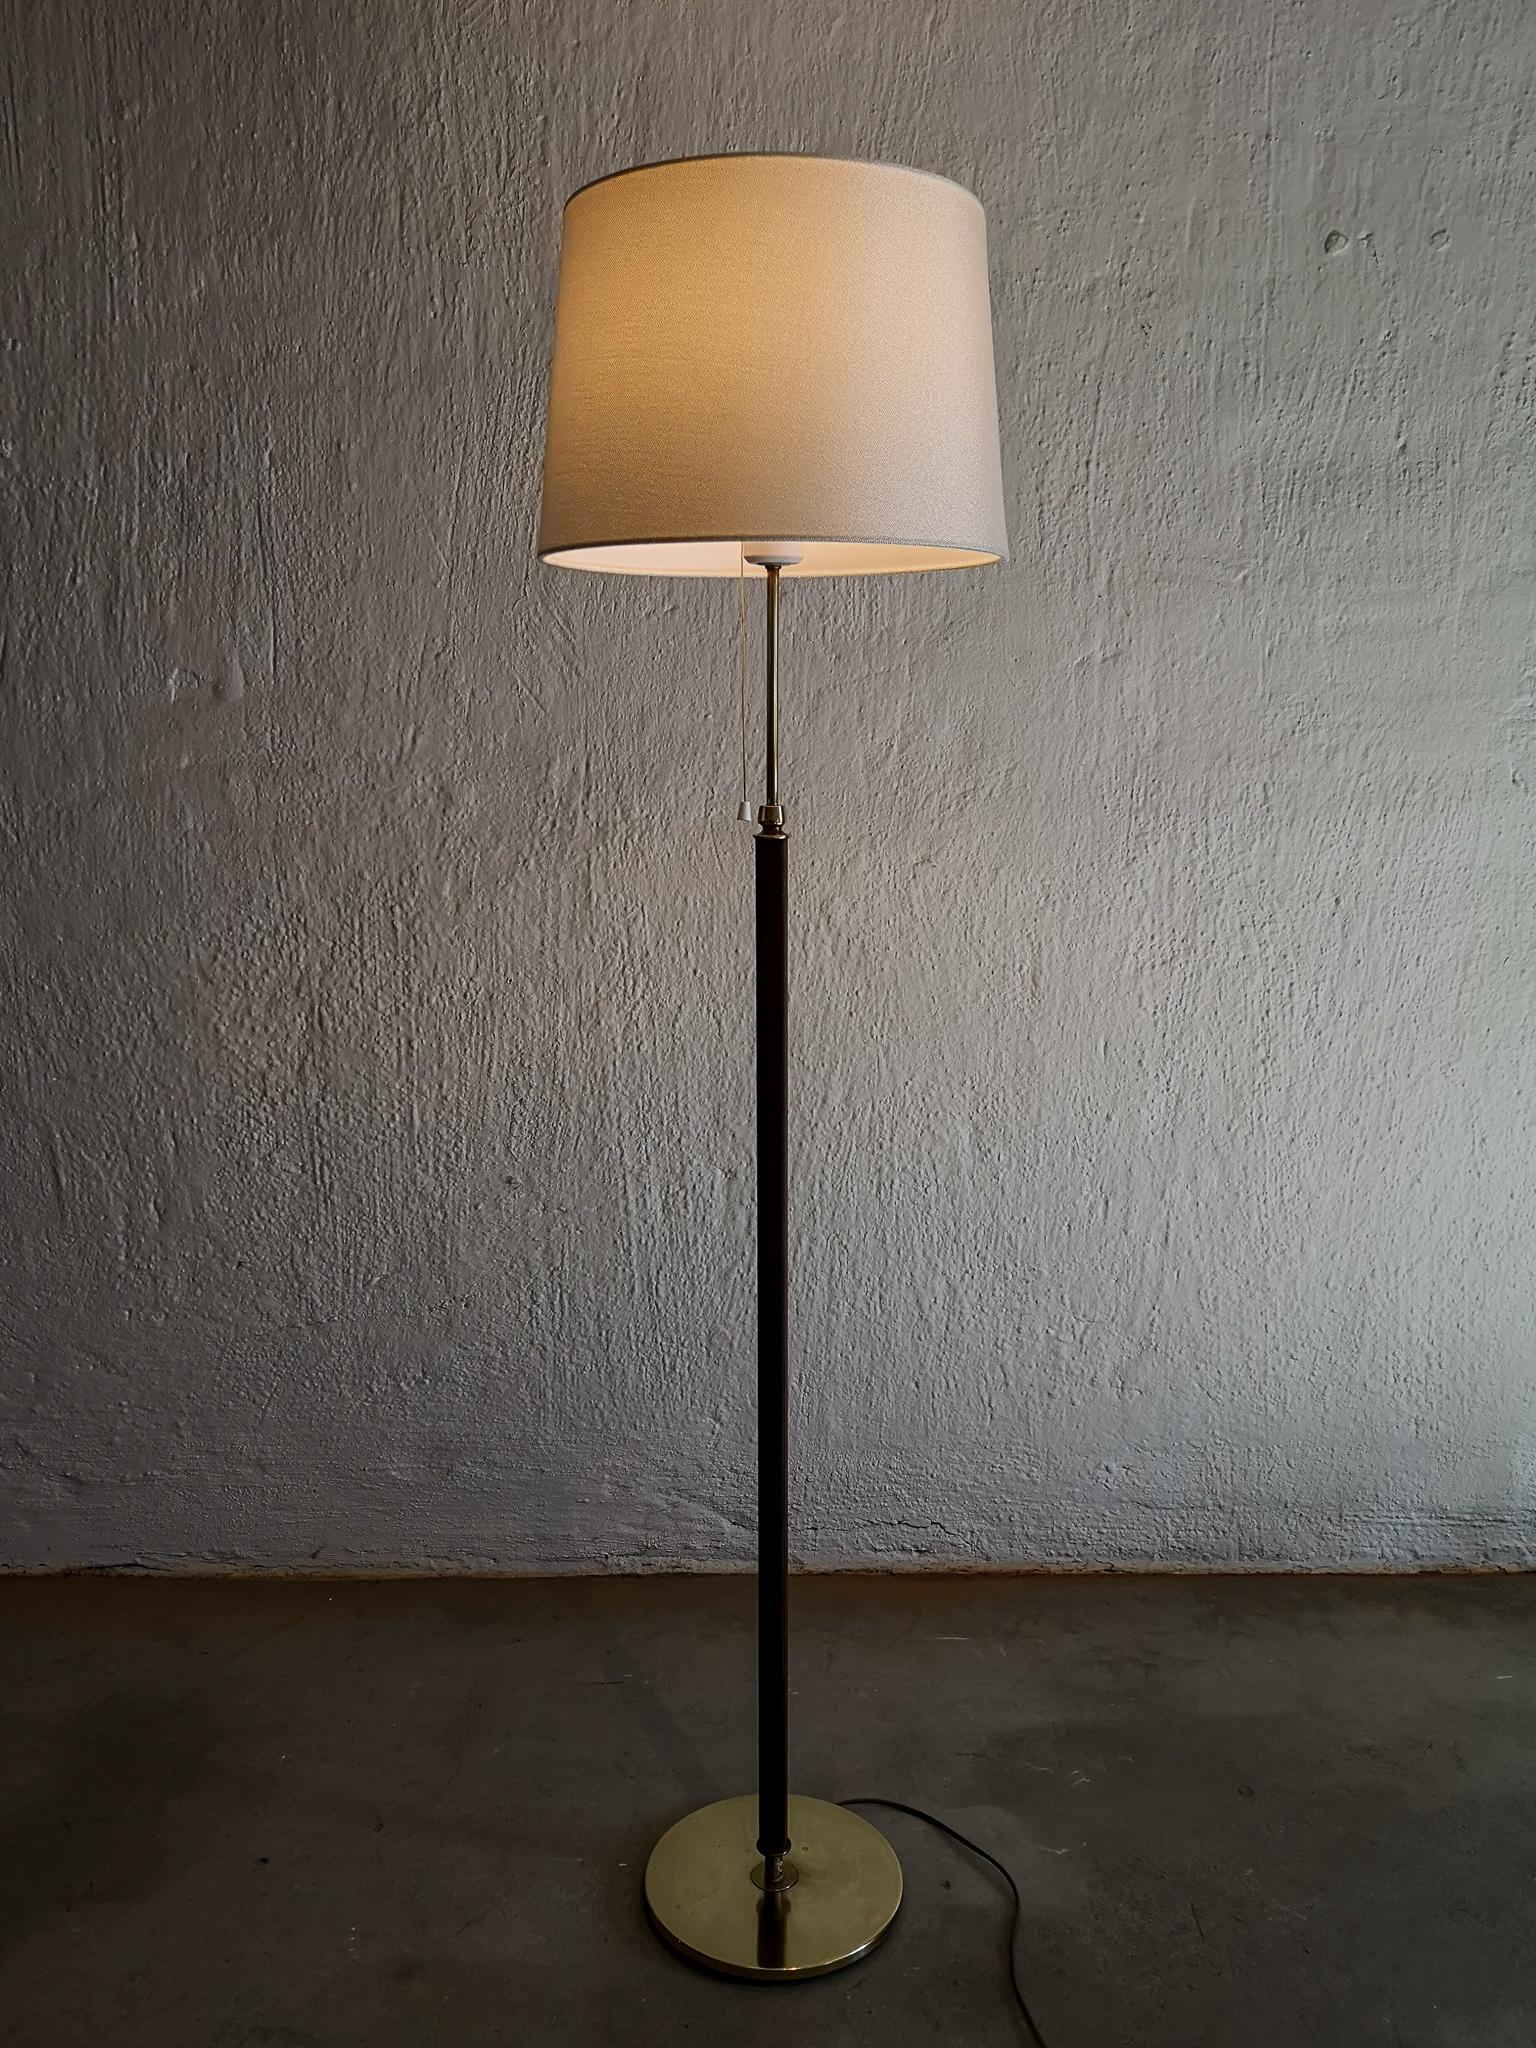 This lamp was made in Sweden at Falkenbergs Belysning. The combining of brass and leather makes this lamp an icon

Good working condition with some dents on the foot and scratches on the brass. The Leather in very good condition.

Measures. H